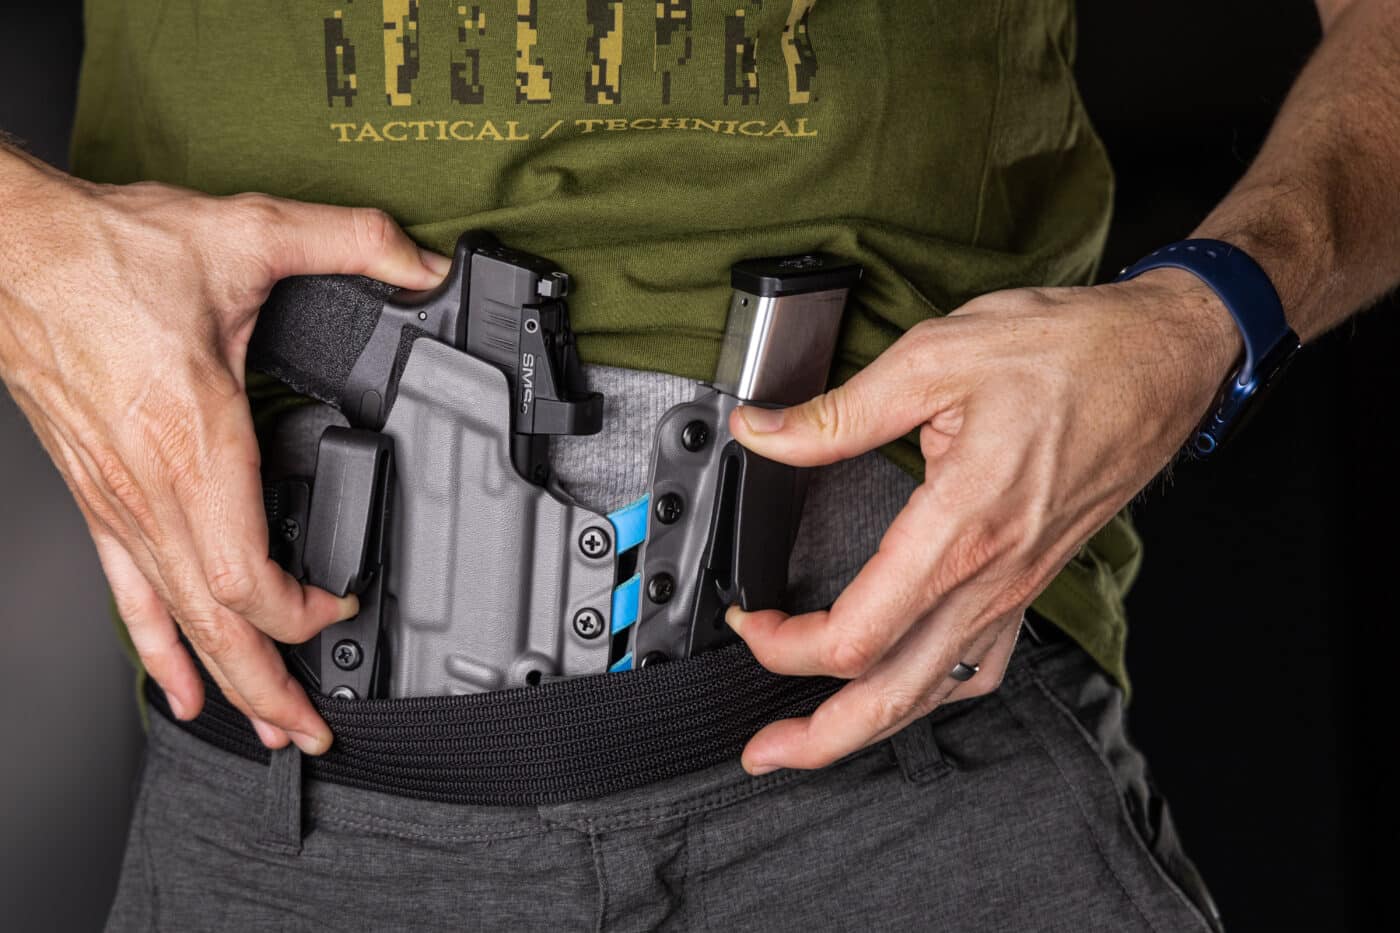 Concealed Carry 101: A Comprehensive Guide - Tips, Methods, and Laws